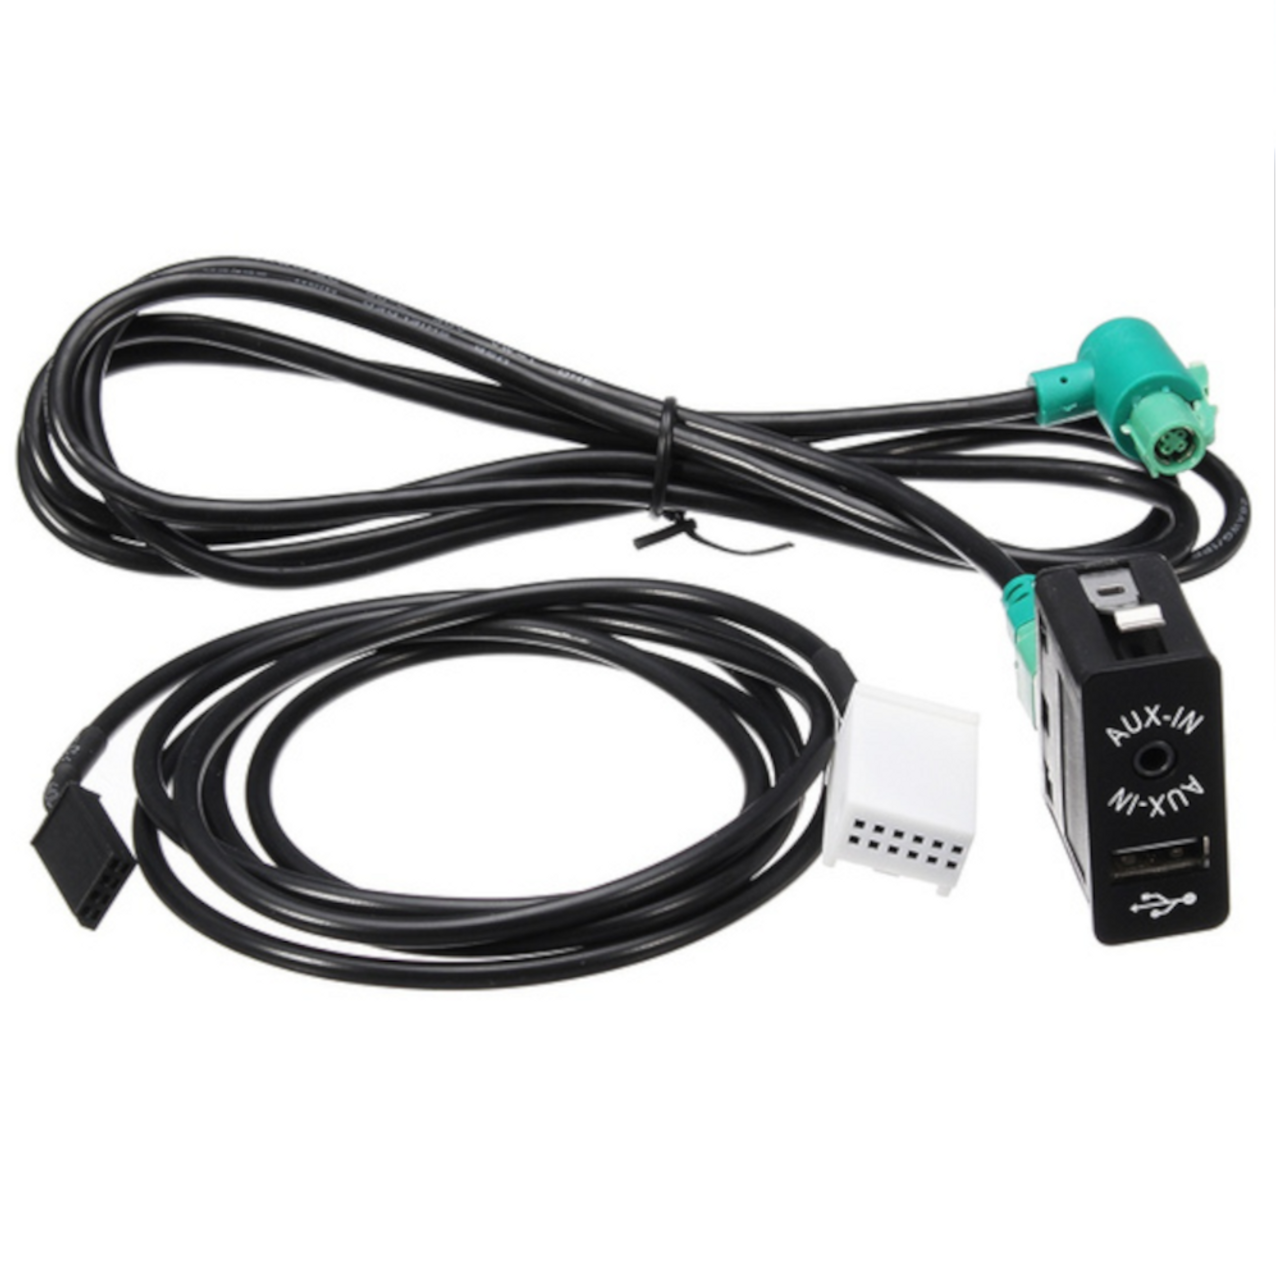 USB AUX Car Switch + USB 4 pin Connecting Wire + AUX 12 pin